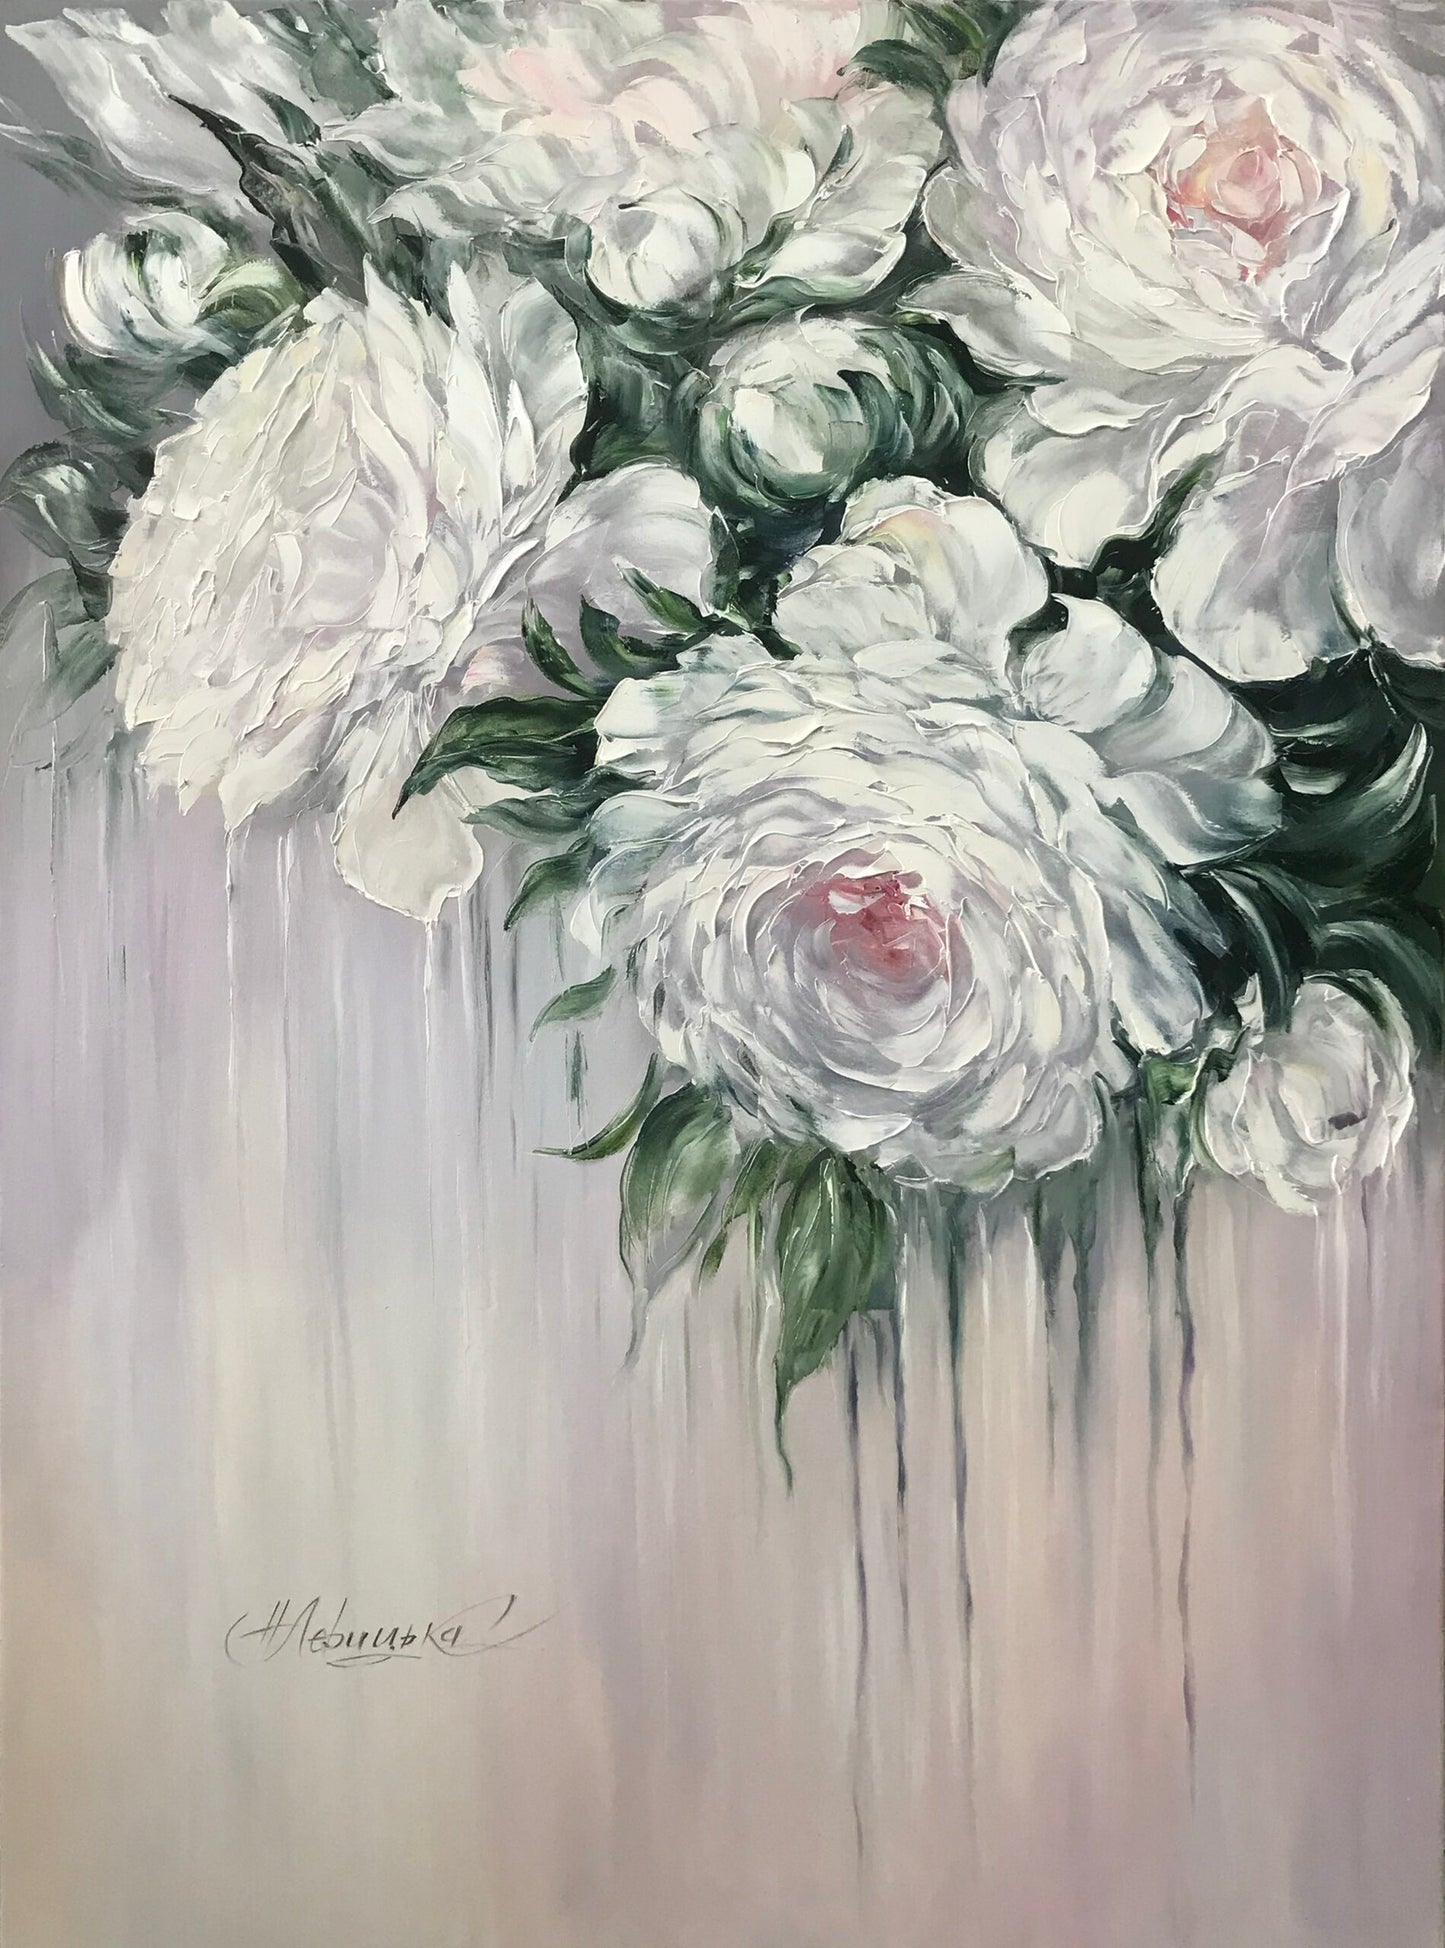 Large Abstract Flower Paintings on Canvas, White Flowers Canvas Wall Art, White Roses Oil Painting Original Artwork, Abstract Rose Art